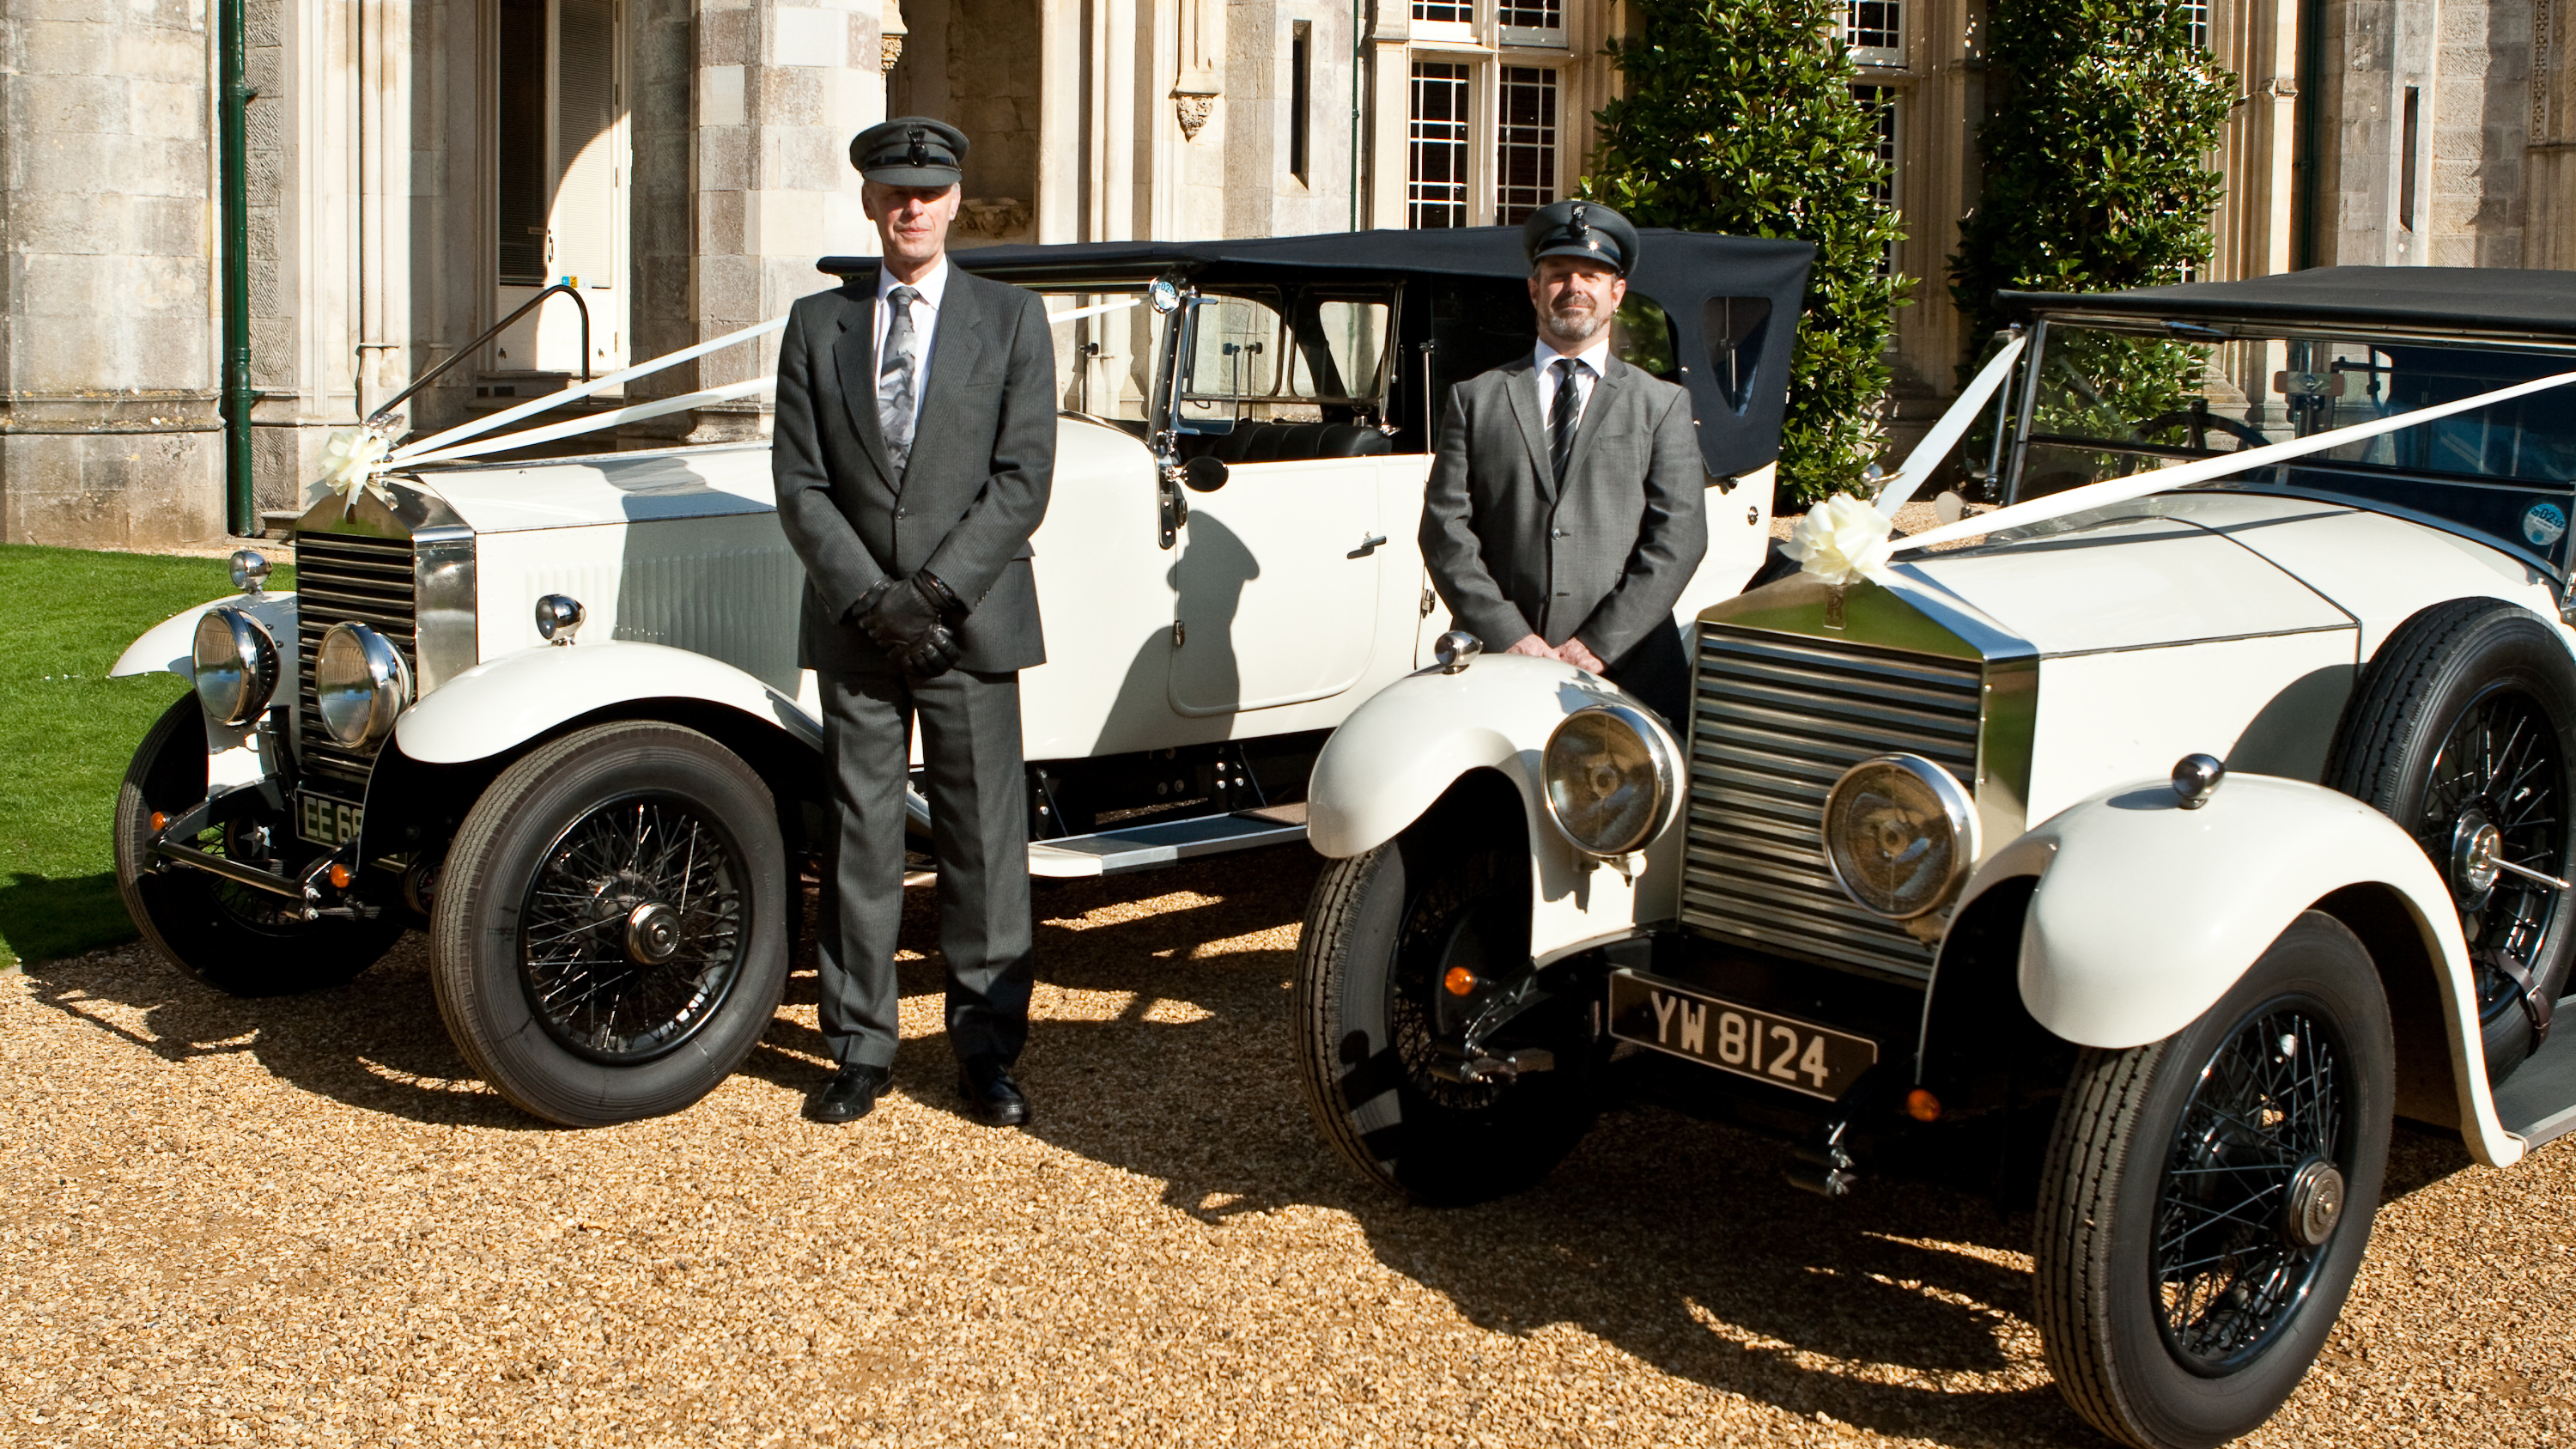 Two vintage wedding cars decorated with white ribbons and bows at a local Charminster wedding. Both vehicles are parked side-by-side with their chauffeurs next to them.